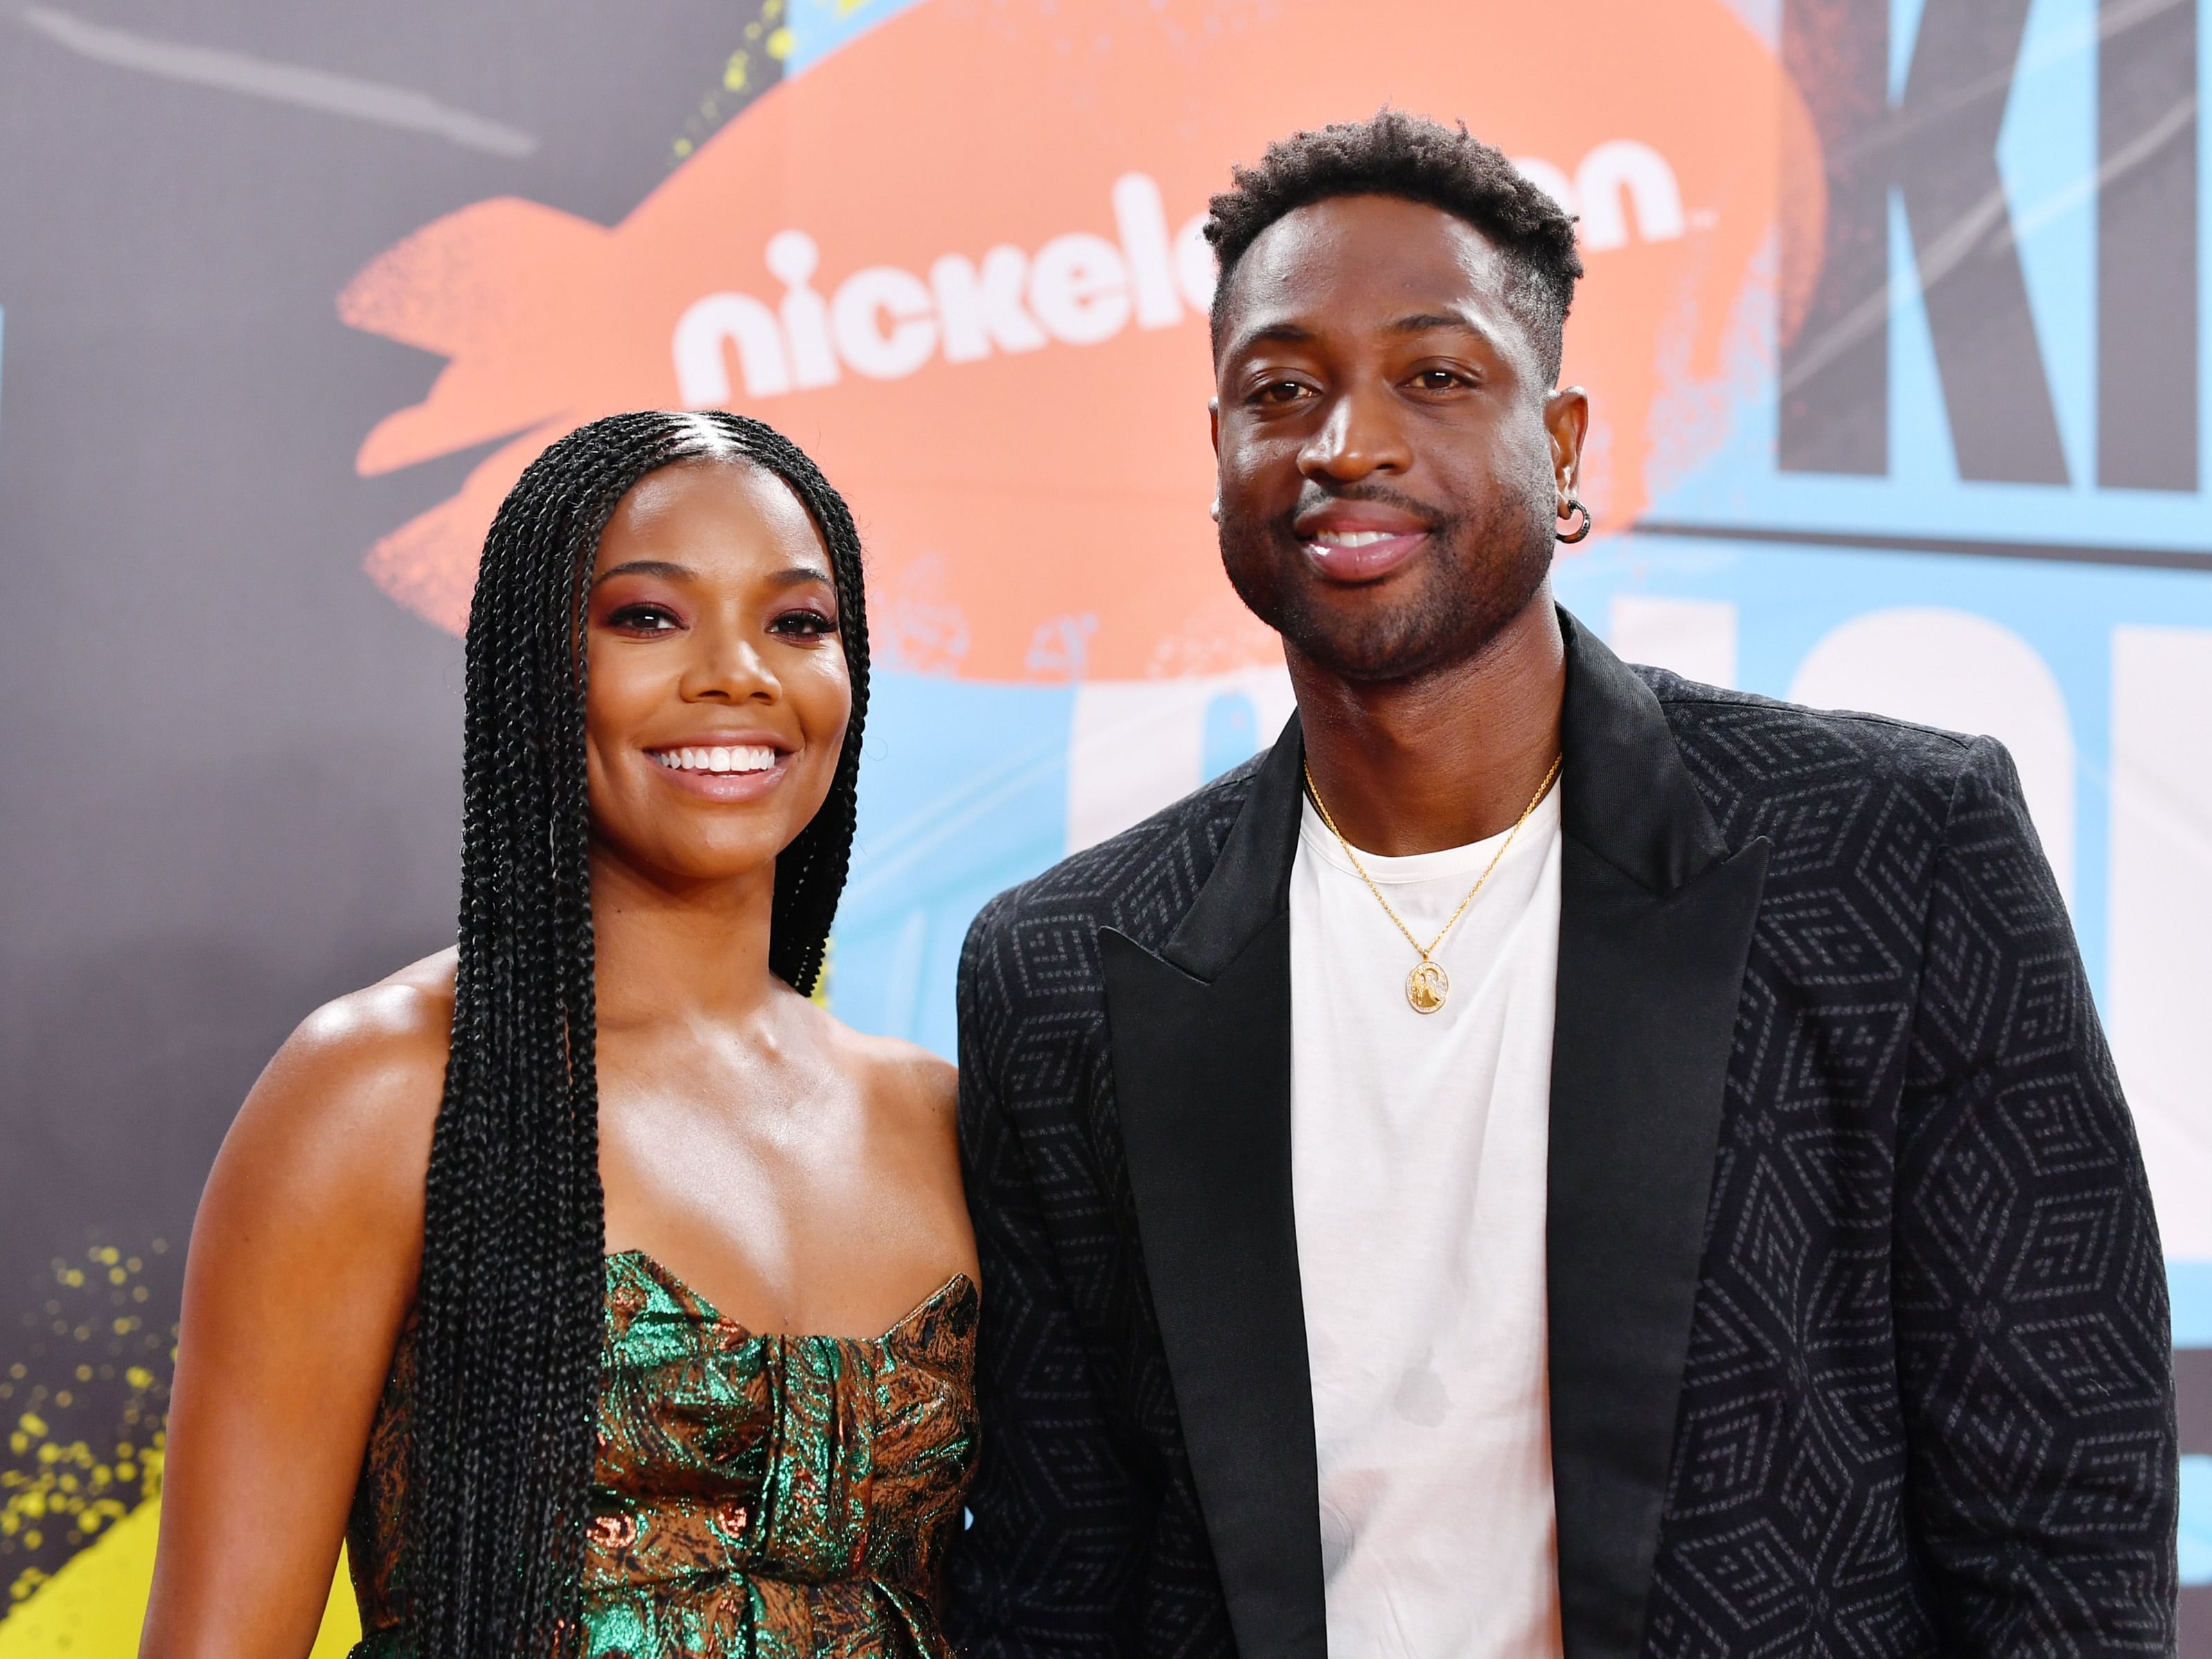 Gabriell Union and Dwyane Wade at the 2019 Nickelodeon Kids